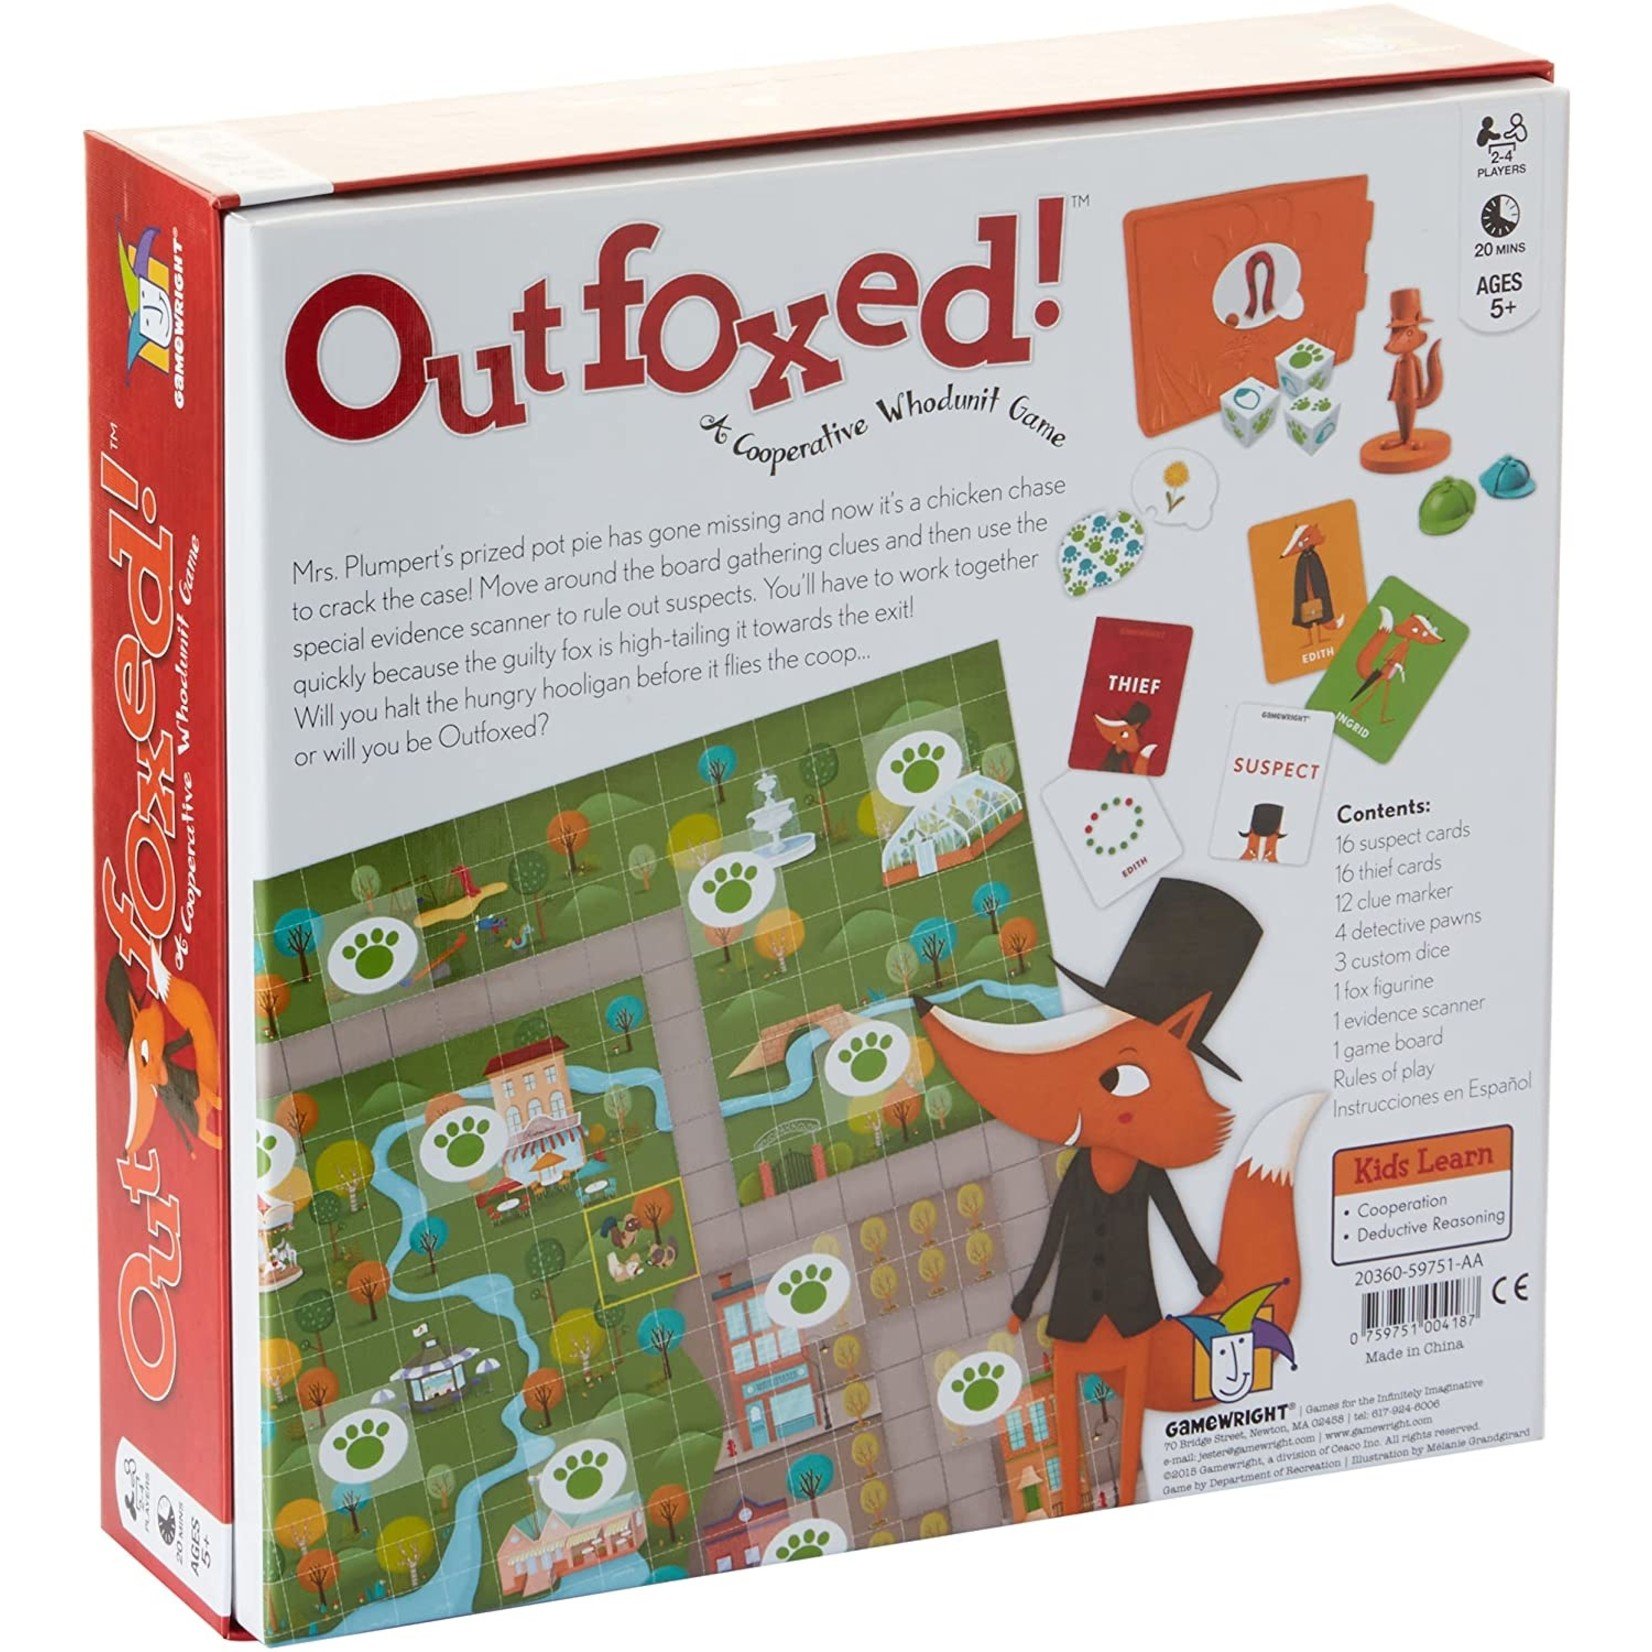 Gamewright Outfoxed!